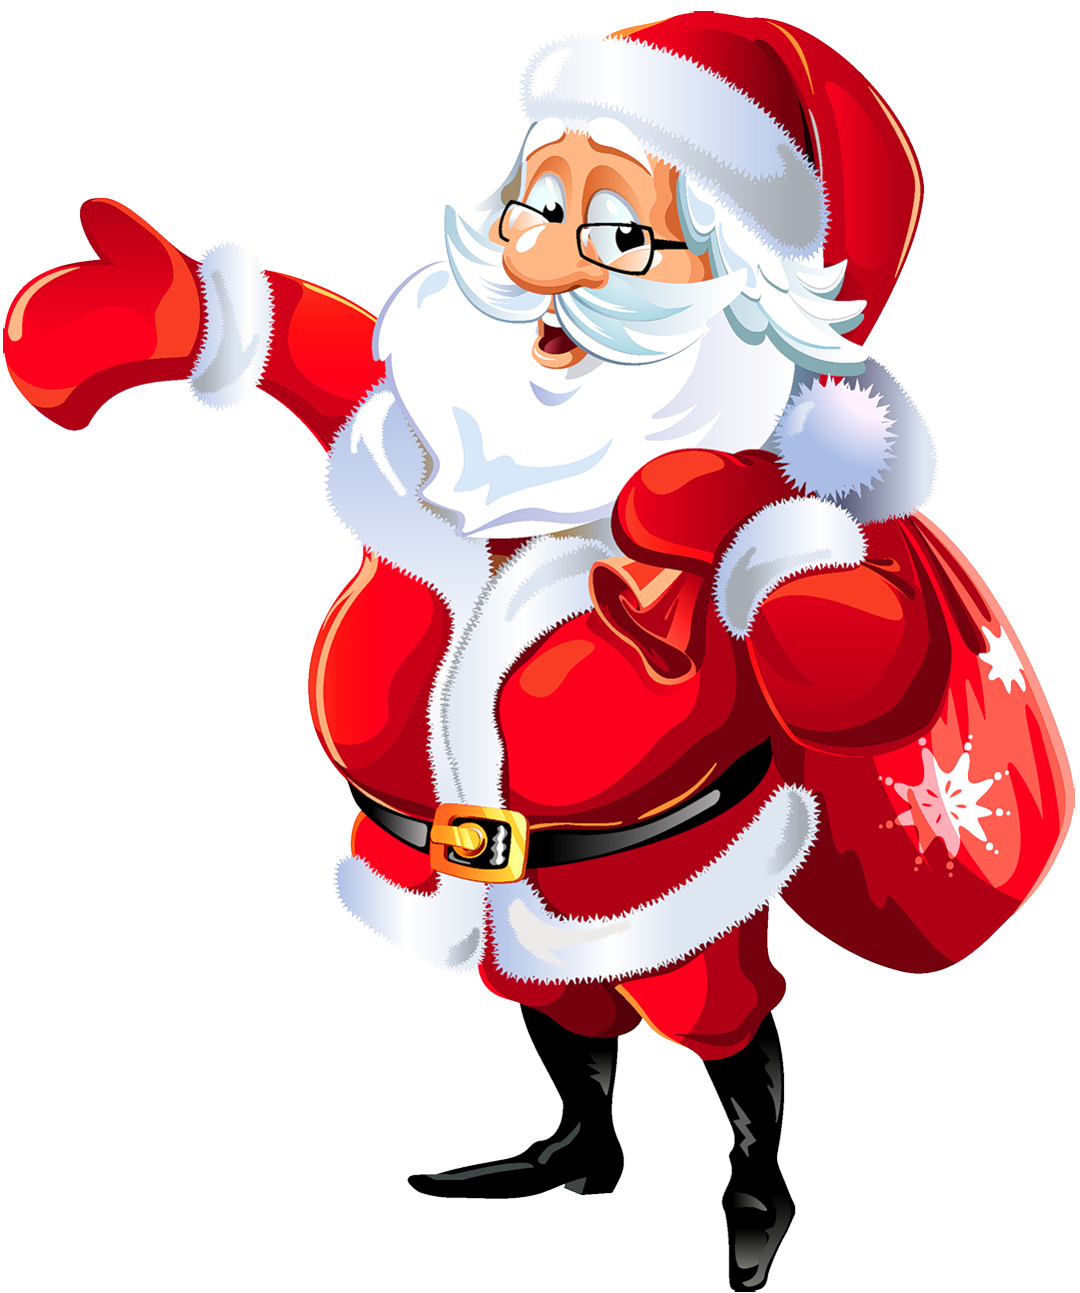 14 Santa Claus Png Free Cliparts That You Can Download To You Computer    